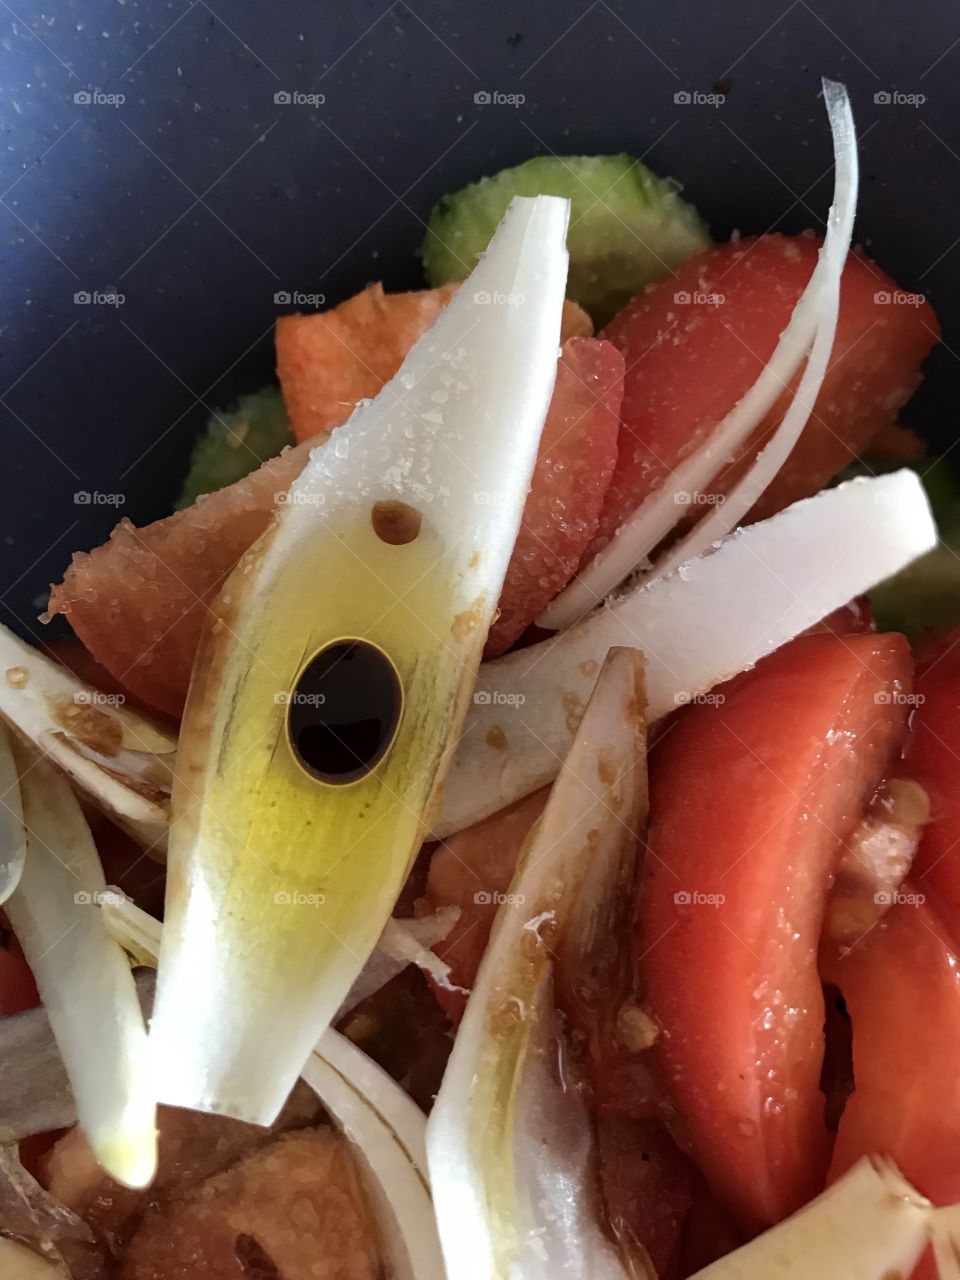 Salad with olive oil and vinegar - yummy.  The vinegar drop has formed an interesting shape